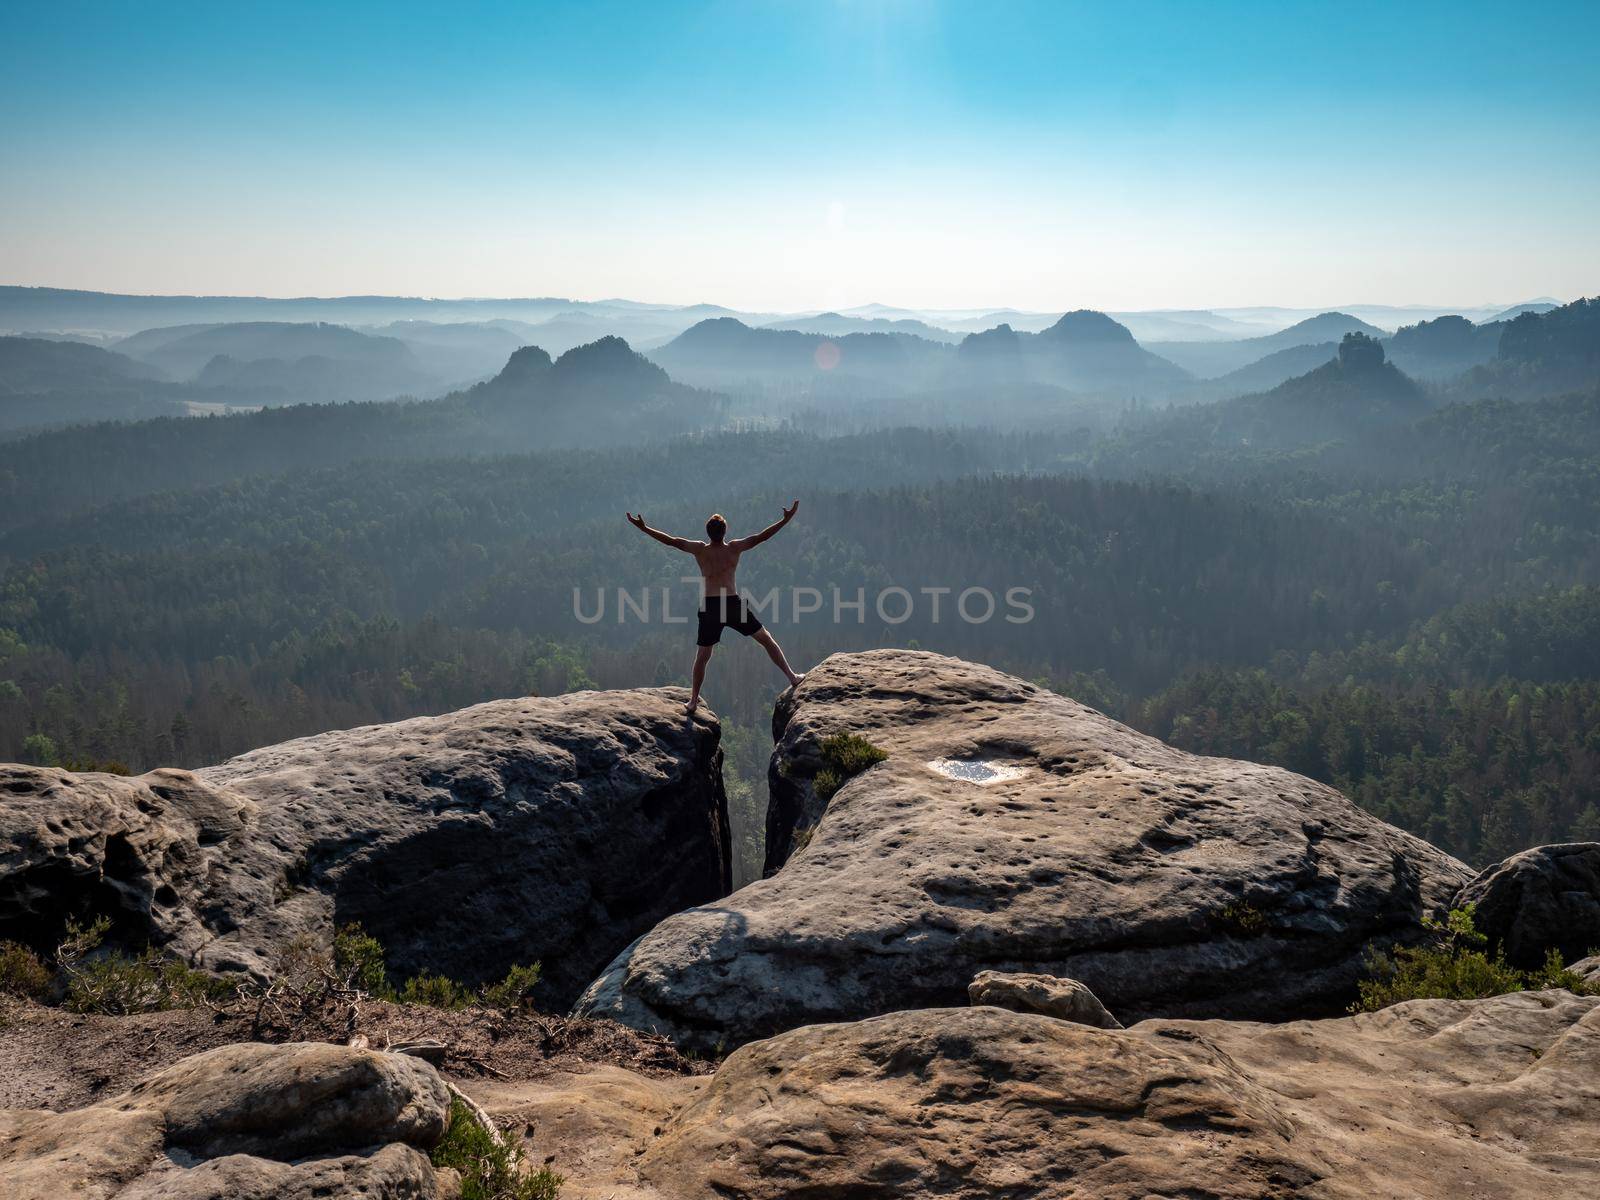 Shirtless male silhouette with raised arms on sharp mountain top. by rdonar2